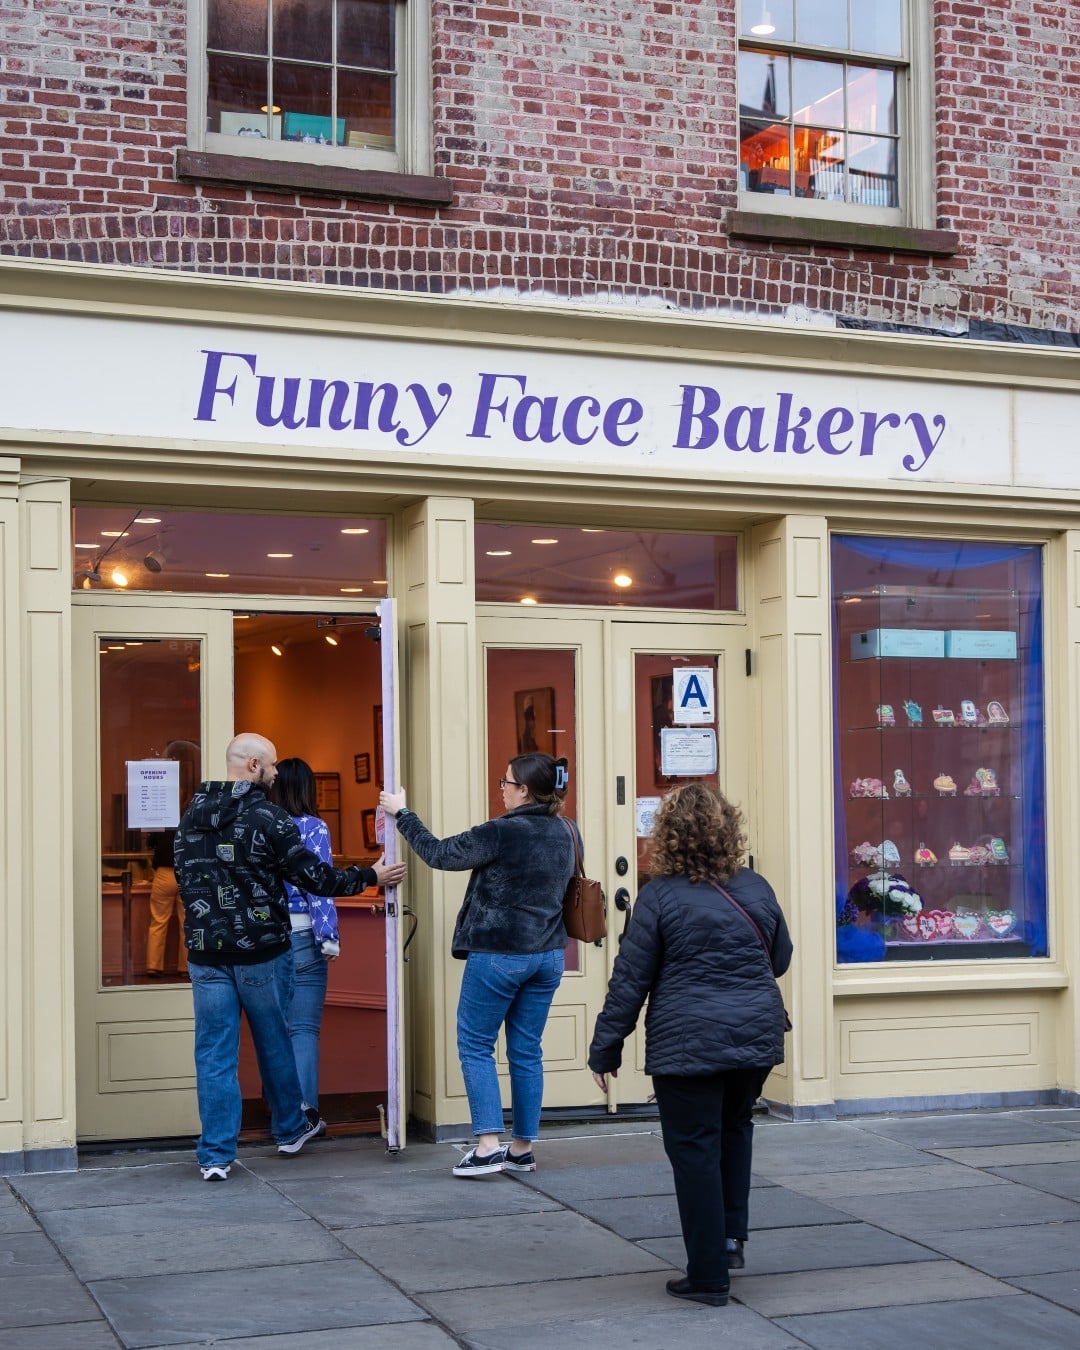 Take care of that holiday shopping list, pick up the perfect Secret Santa gift, or snag some sweets for the office. Festive treats await inside @funnyfacebakery #TheSeaport